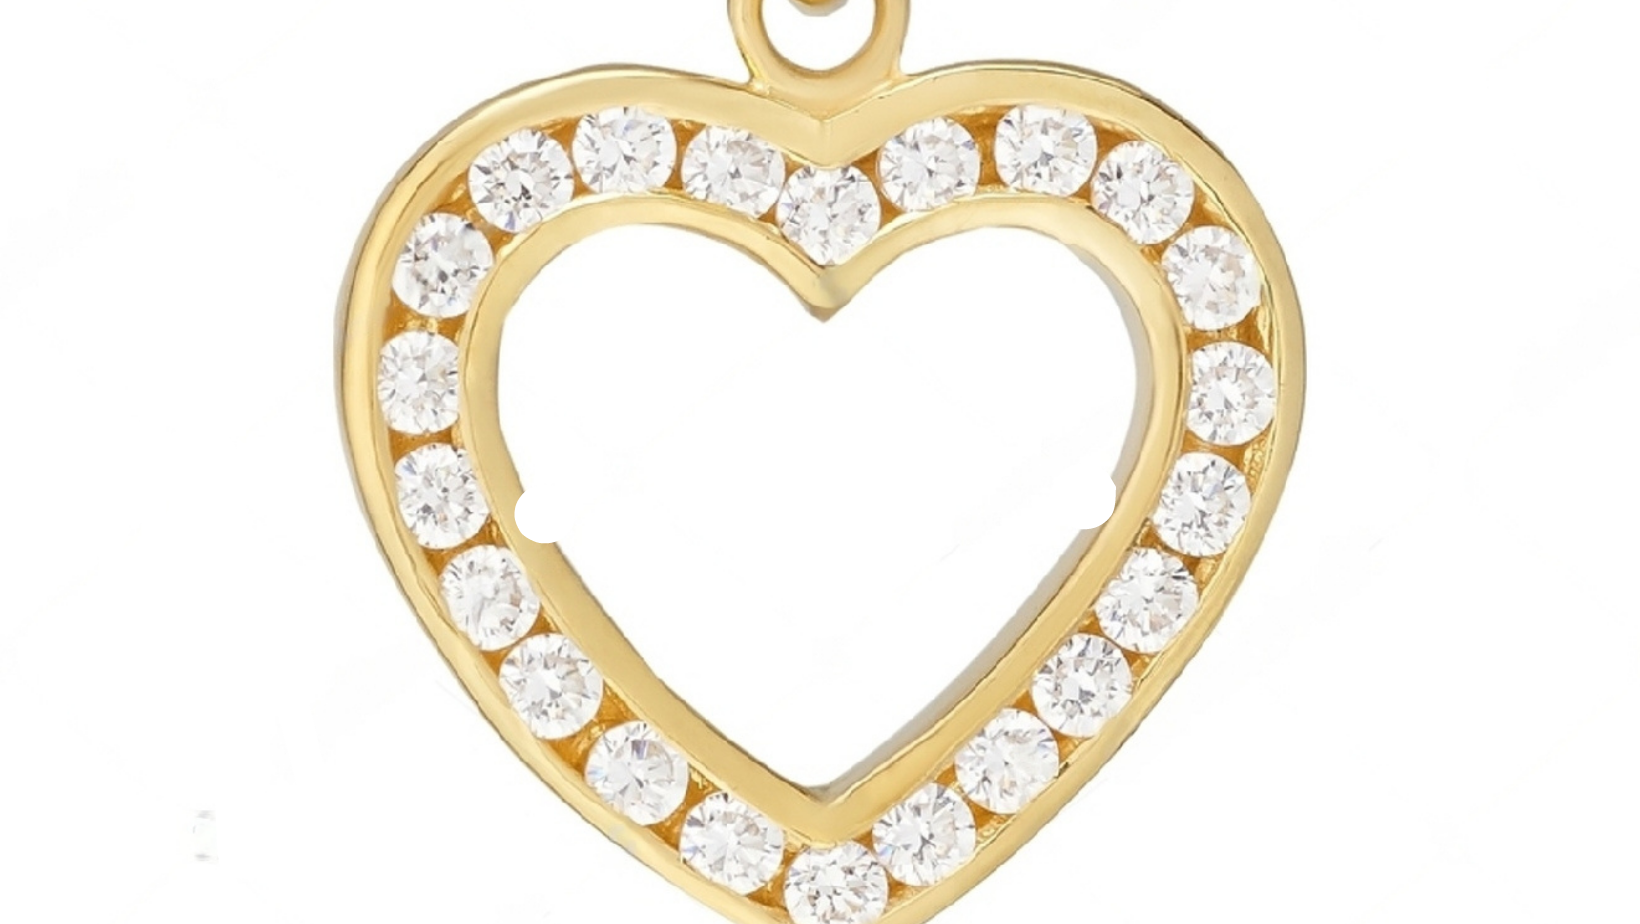 The Perfect Gift: A Yellow Gold Heart Pendant With Diamonds